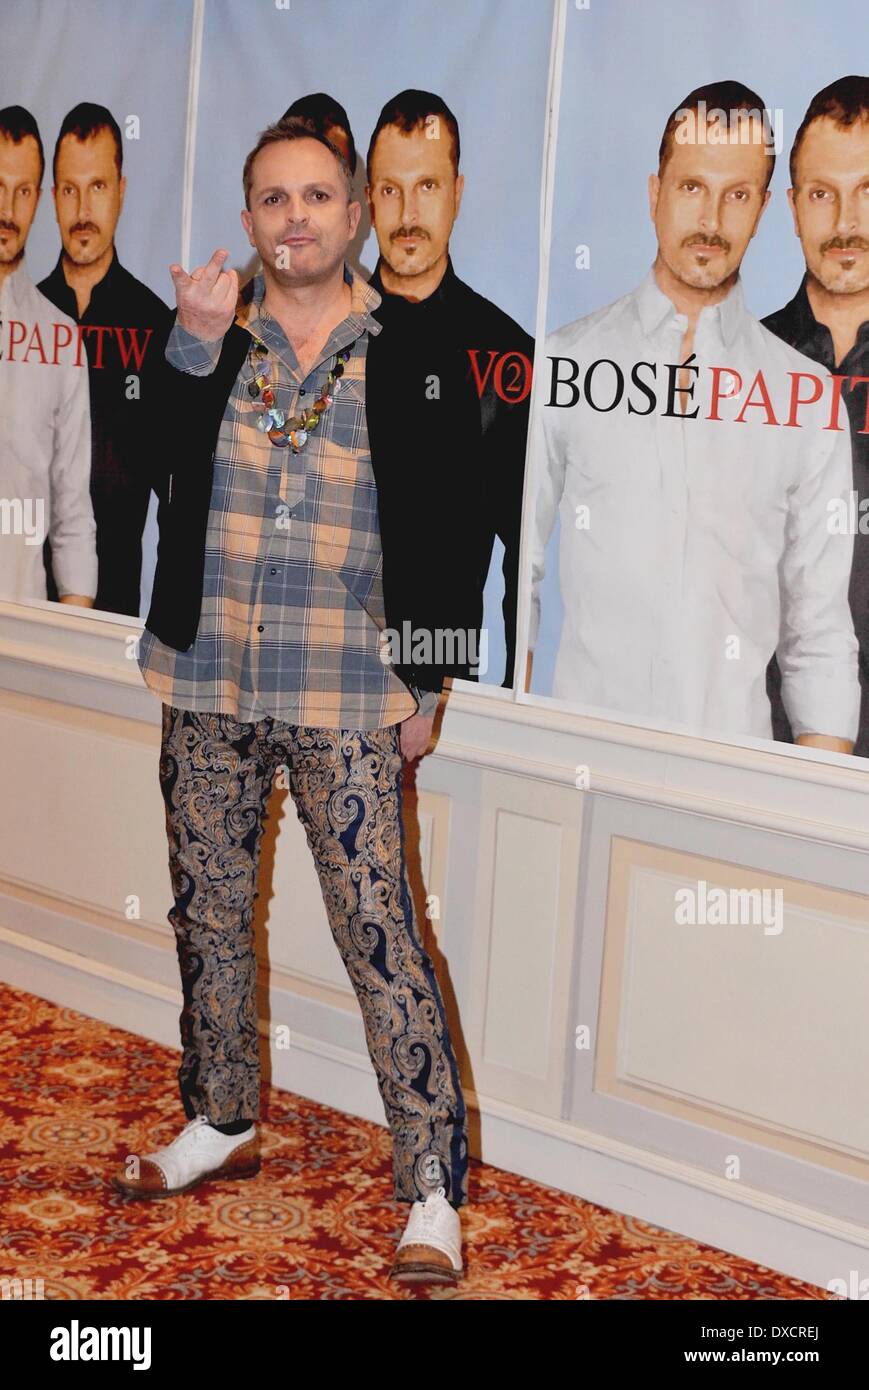 Bose promotes his new album 'Papitwo' at the Principe Di Savoia Hotel Featuring: Miguel Bose Where: Milan, Italy When: 0 Stock Photo -